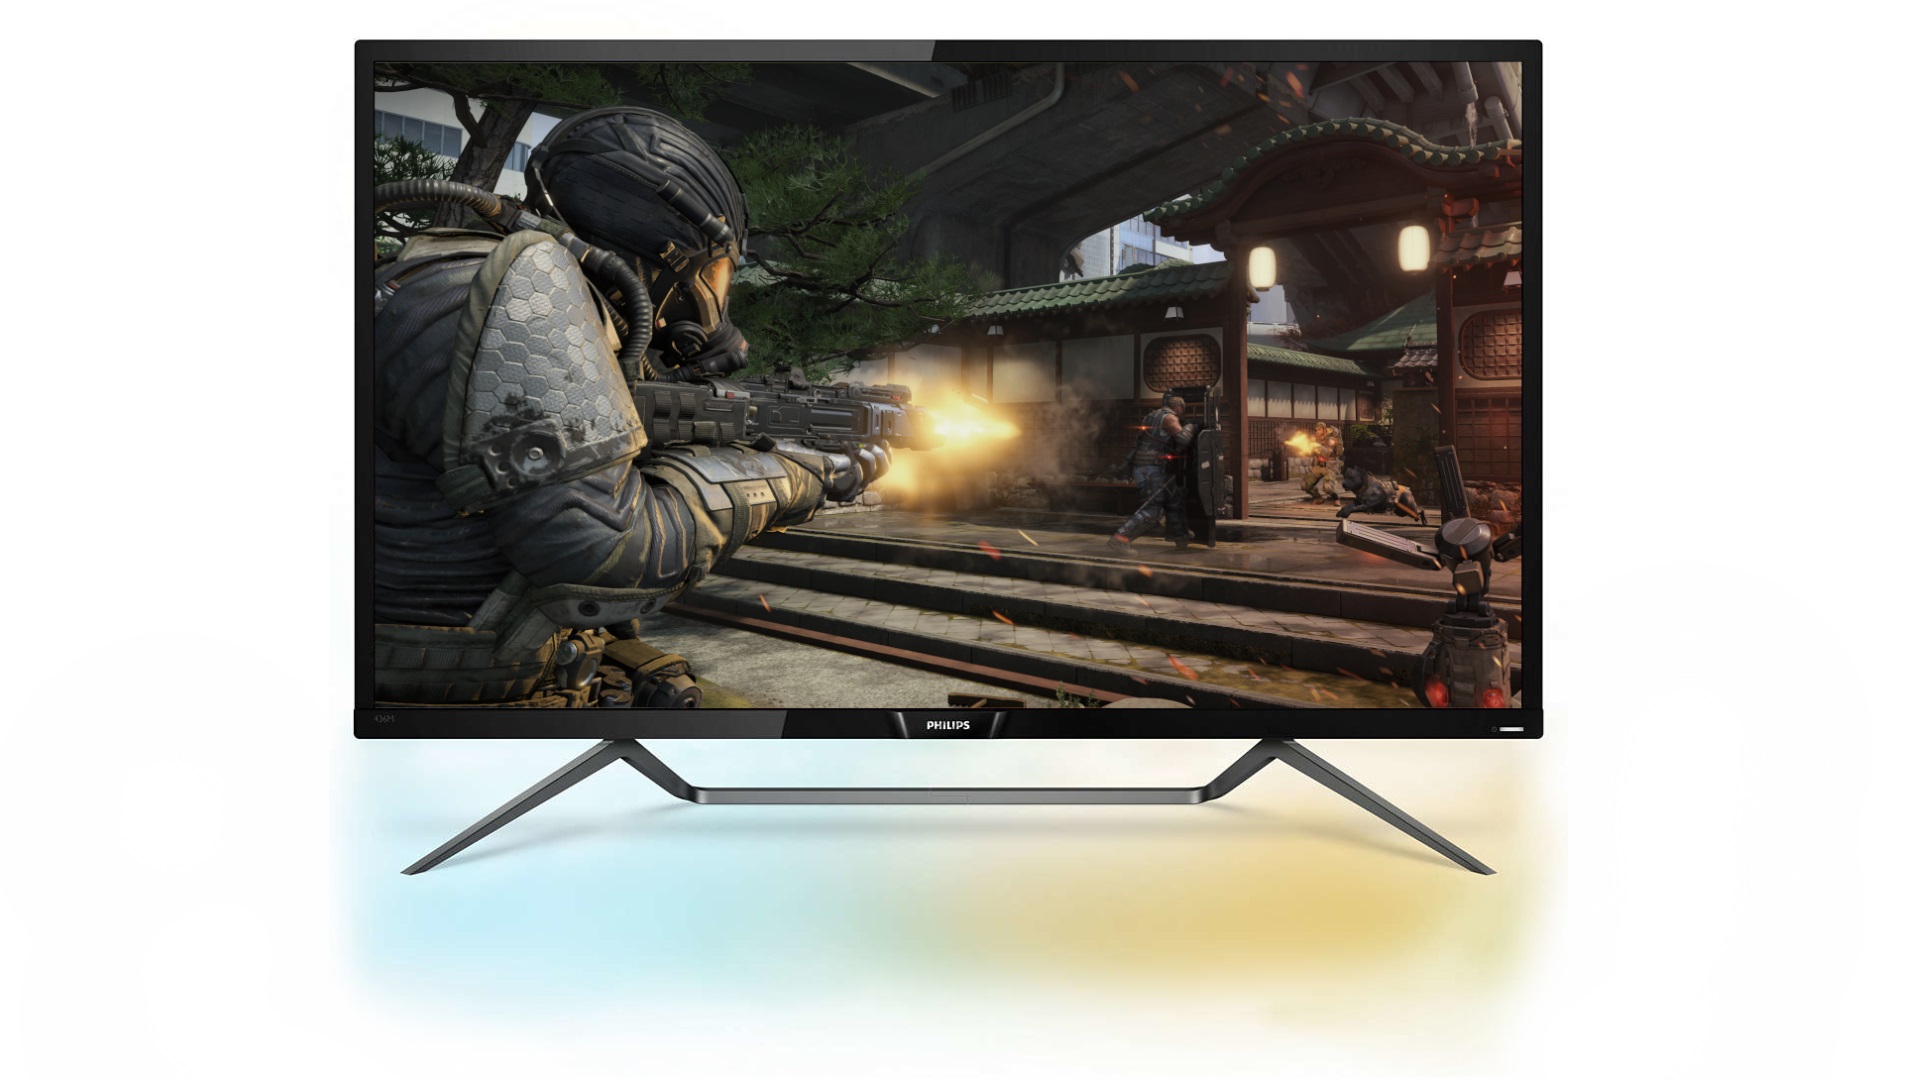 Philips Momentum 436M6VBPAB review: the and 4K HDR gaming monitor on the market | PCGamesN